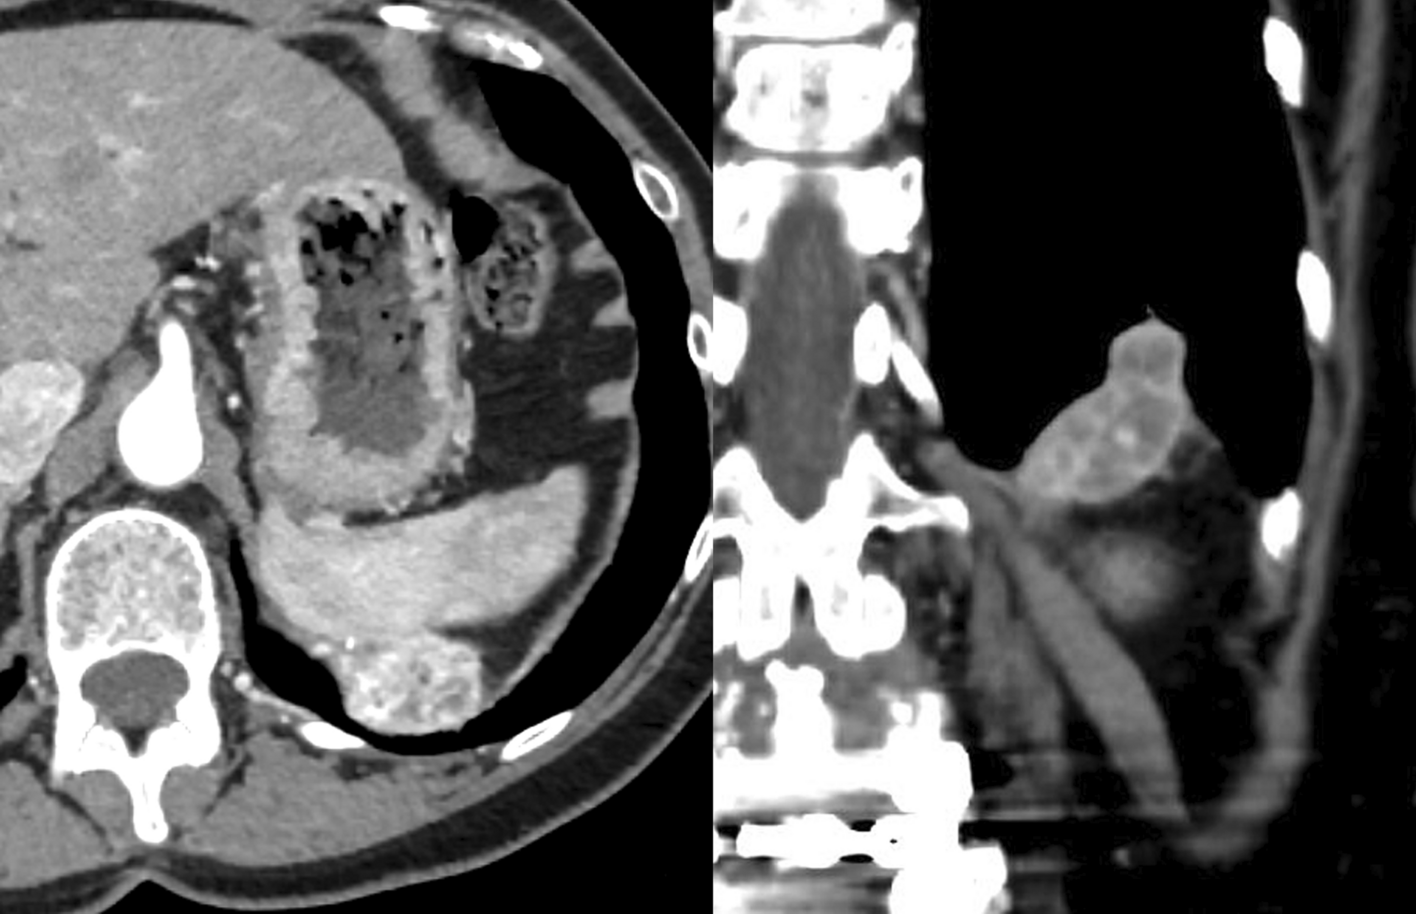 Cryoablation of a Large Diaphragmatic Metastasis with Long-Term Follow-Up